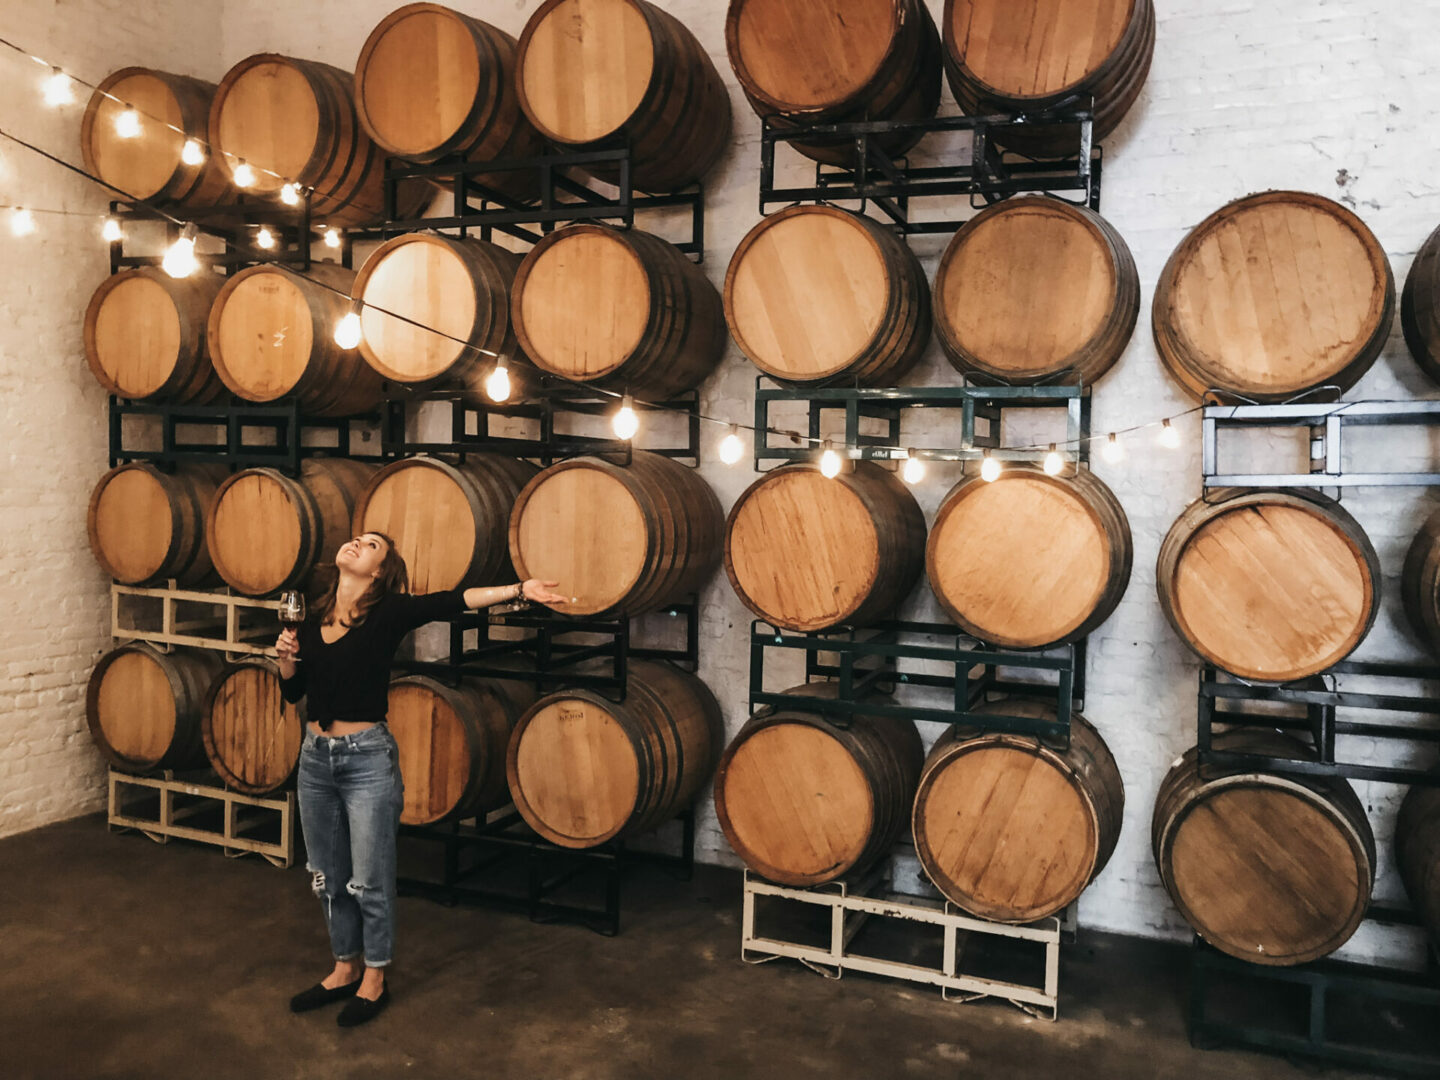 Paige in front of wine barrels in a winery